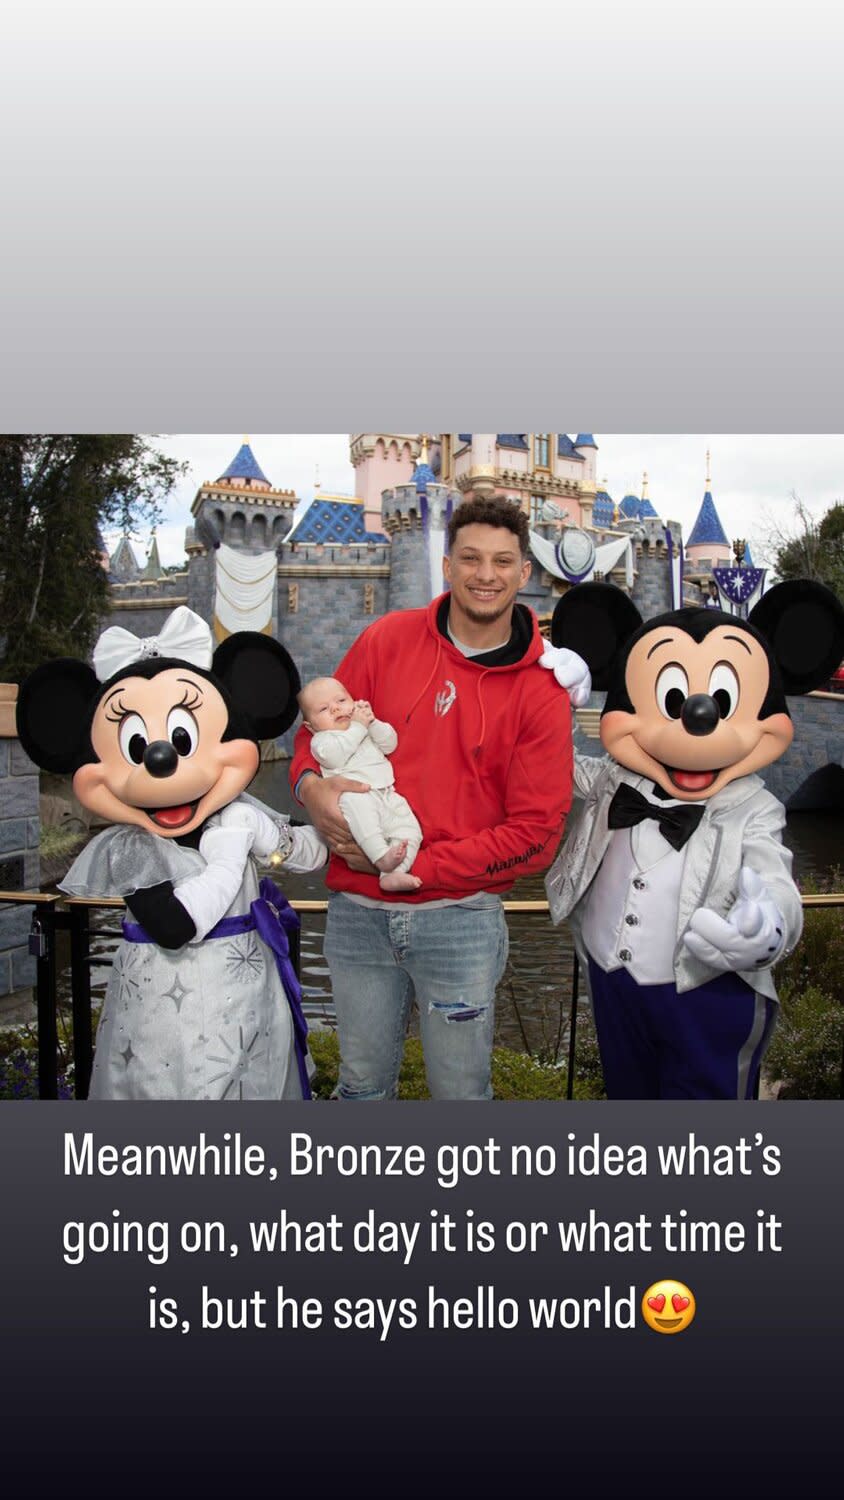 Patrick Mahomes Poses with Newborn Son Bronze, Mickey, and Minnie Mouse During Disneyland Visit: 'Hello World'